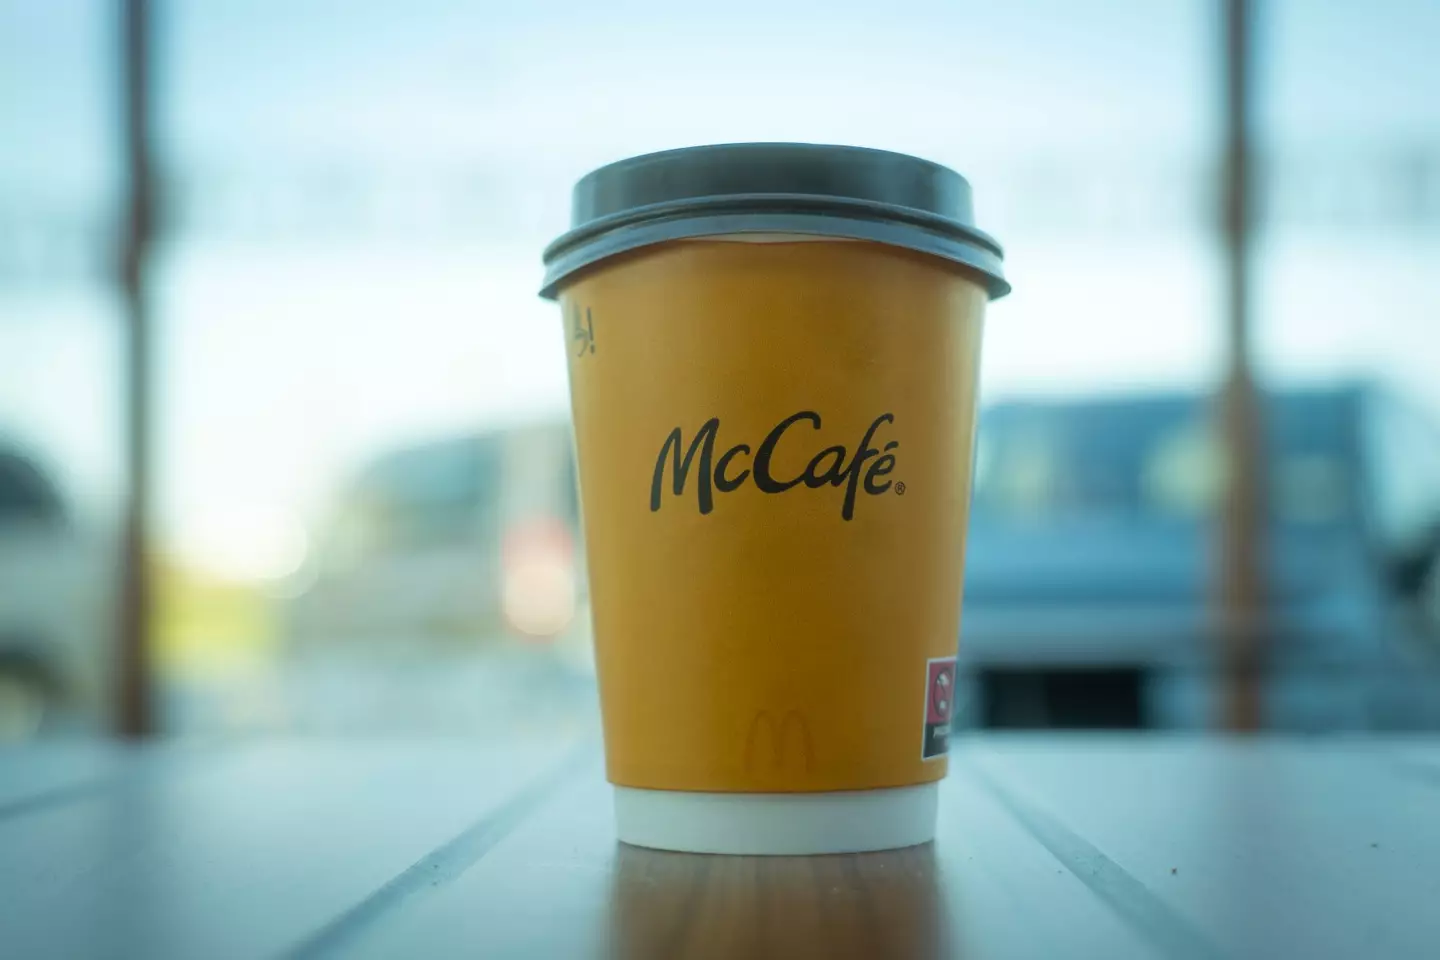 Mable Childress claims she was severely burned by McDonald's coffee.